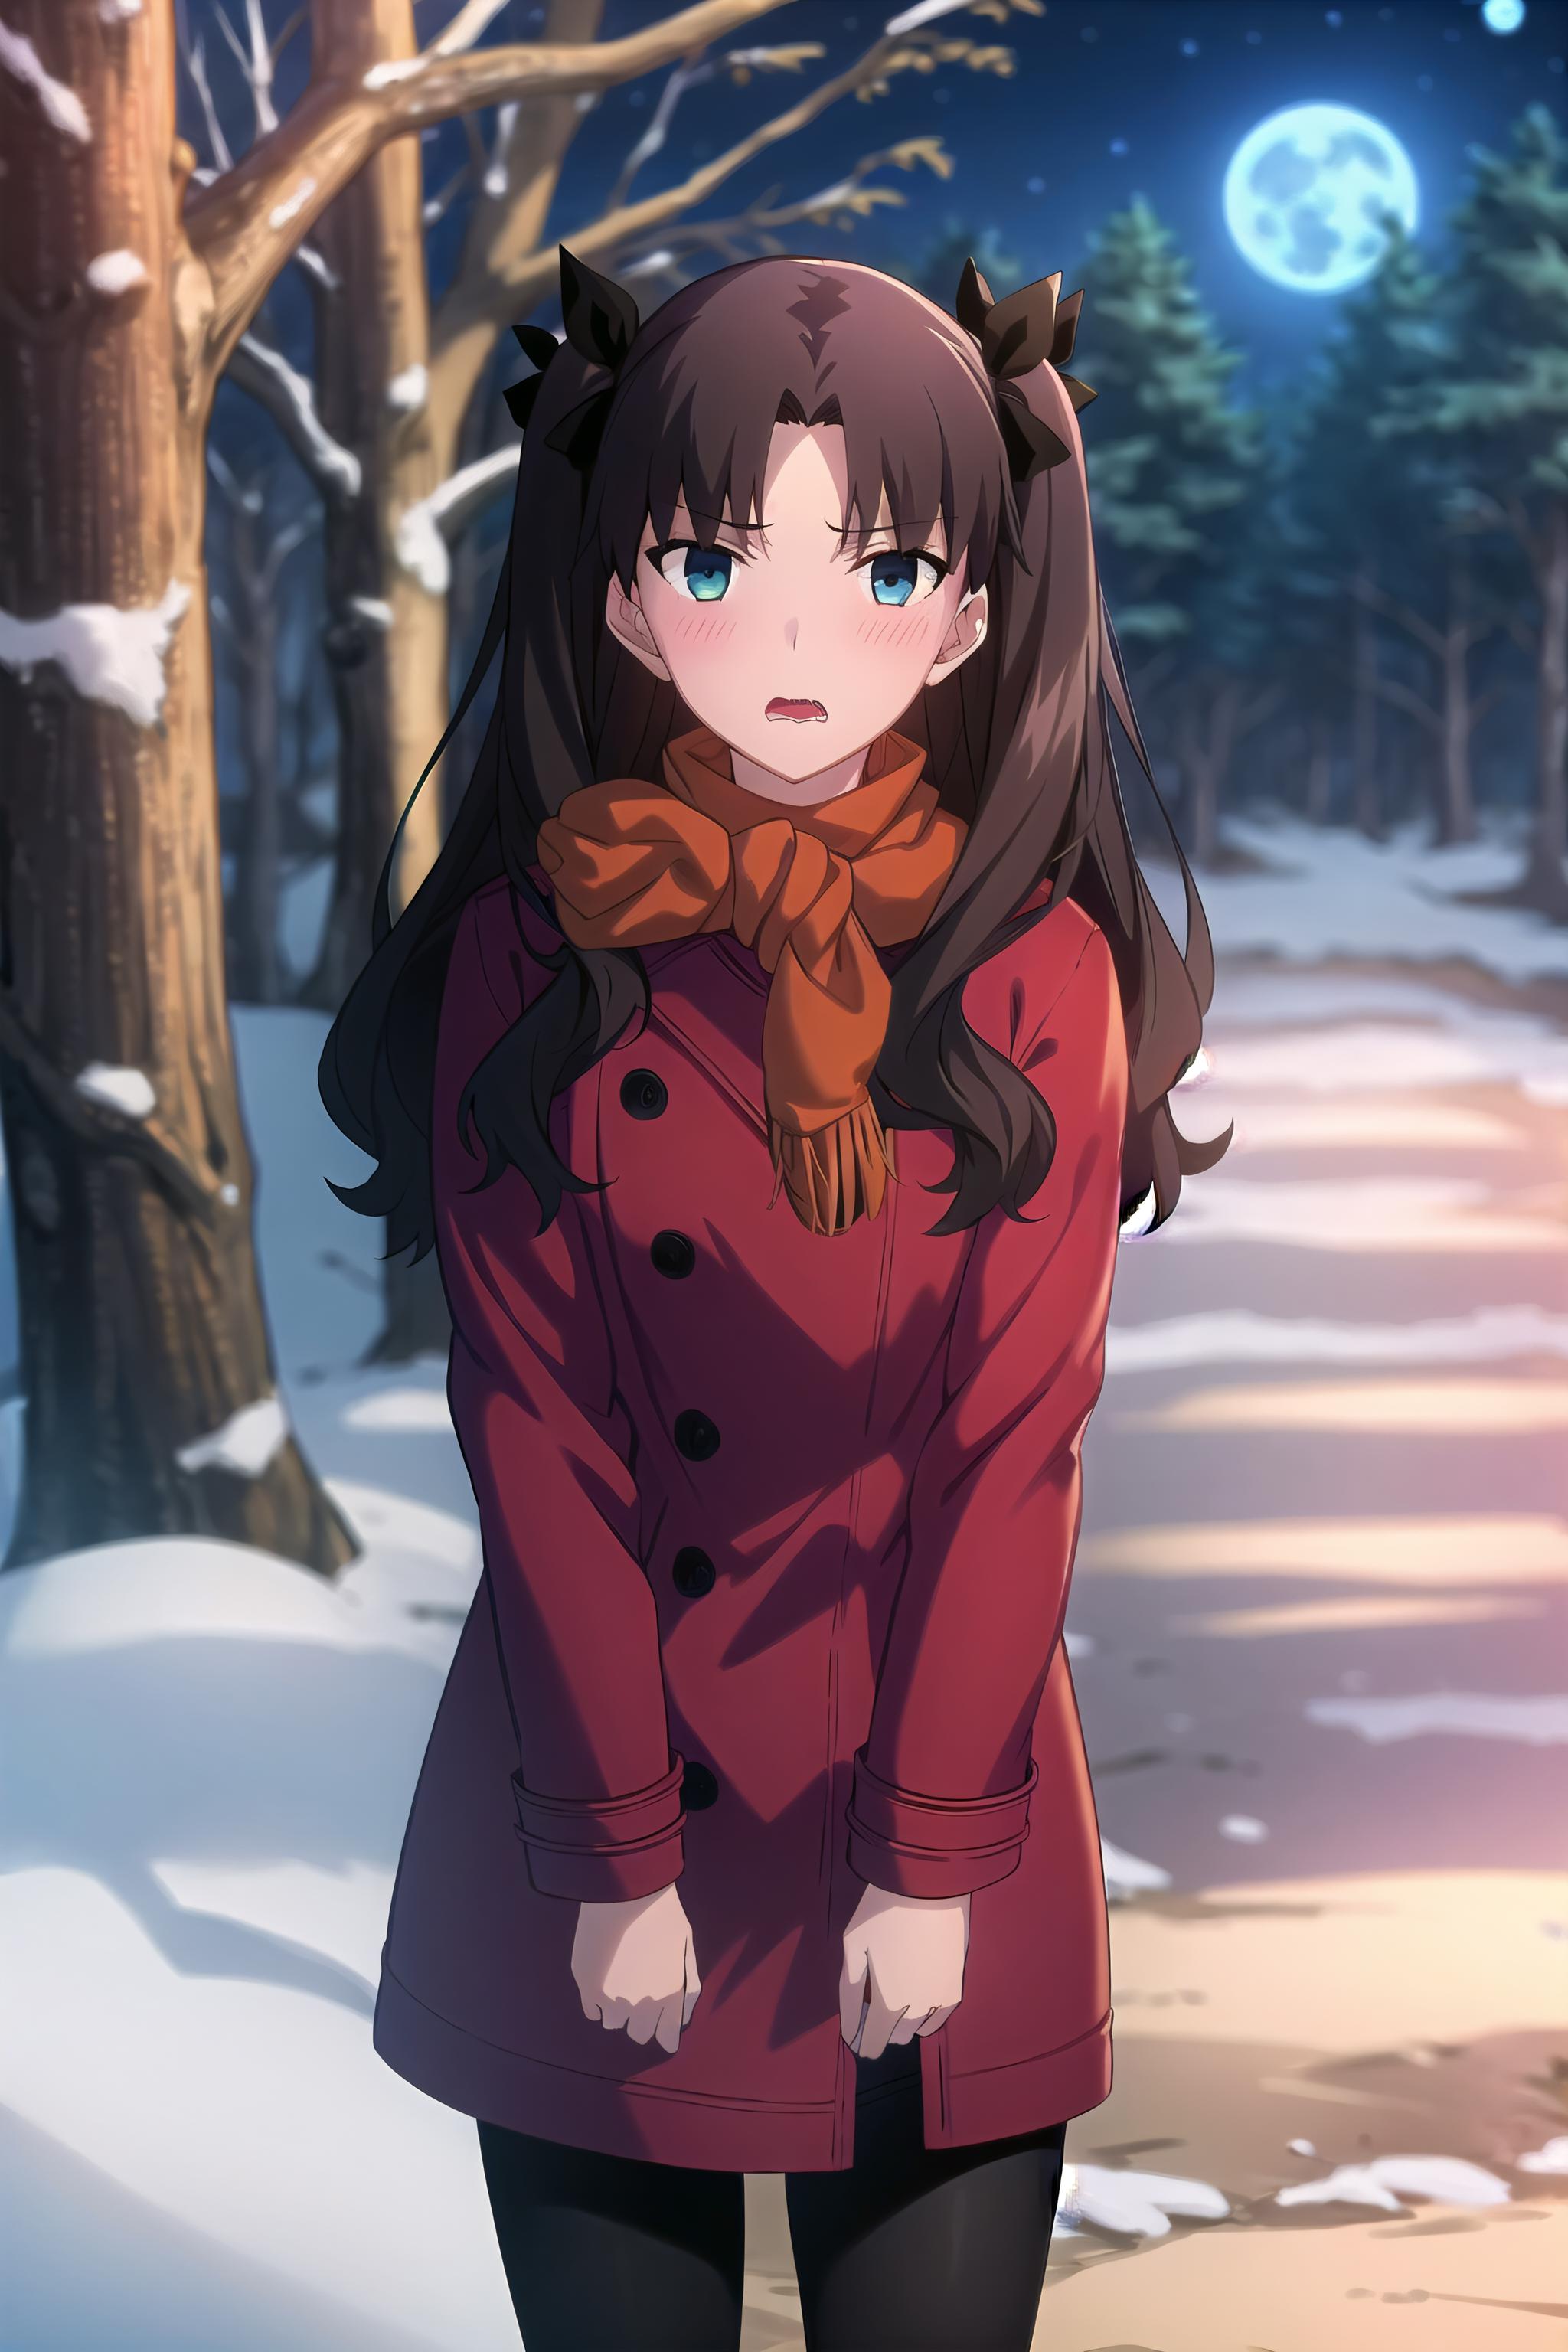 Fate/stay night Rin Tōsaka Fate/Zero Anime Type-Moon, Anime, black Hair,  love Couple, fictional Character png | PNGWing